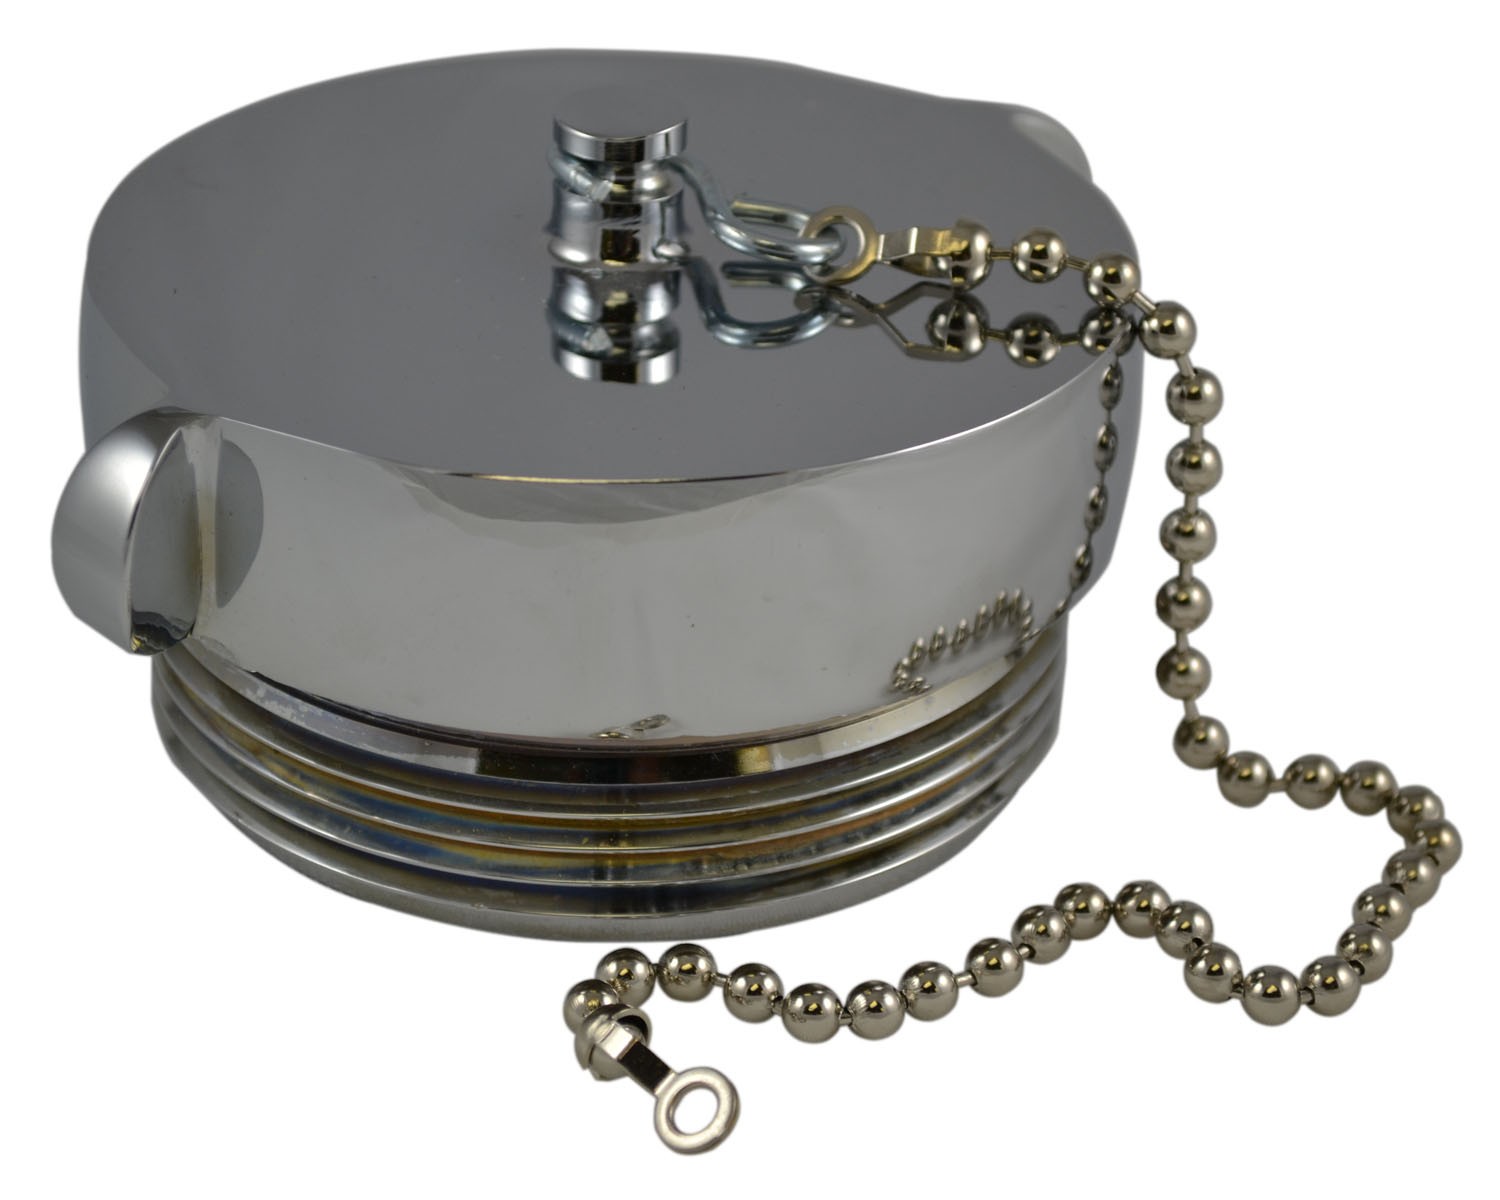 HCC28, 3.5 National Standard Thread ( NST) Female Cap Brass Chrome Plated with Chain, Rockerlug Tested to 500 psi